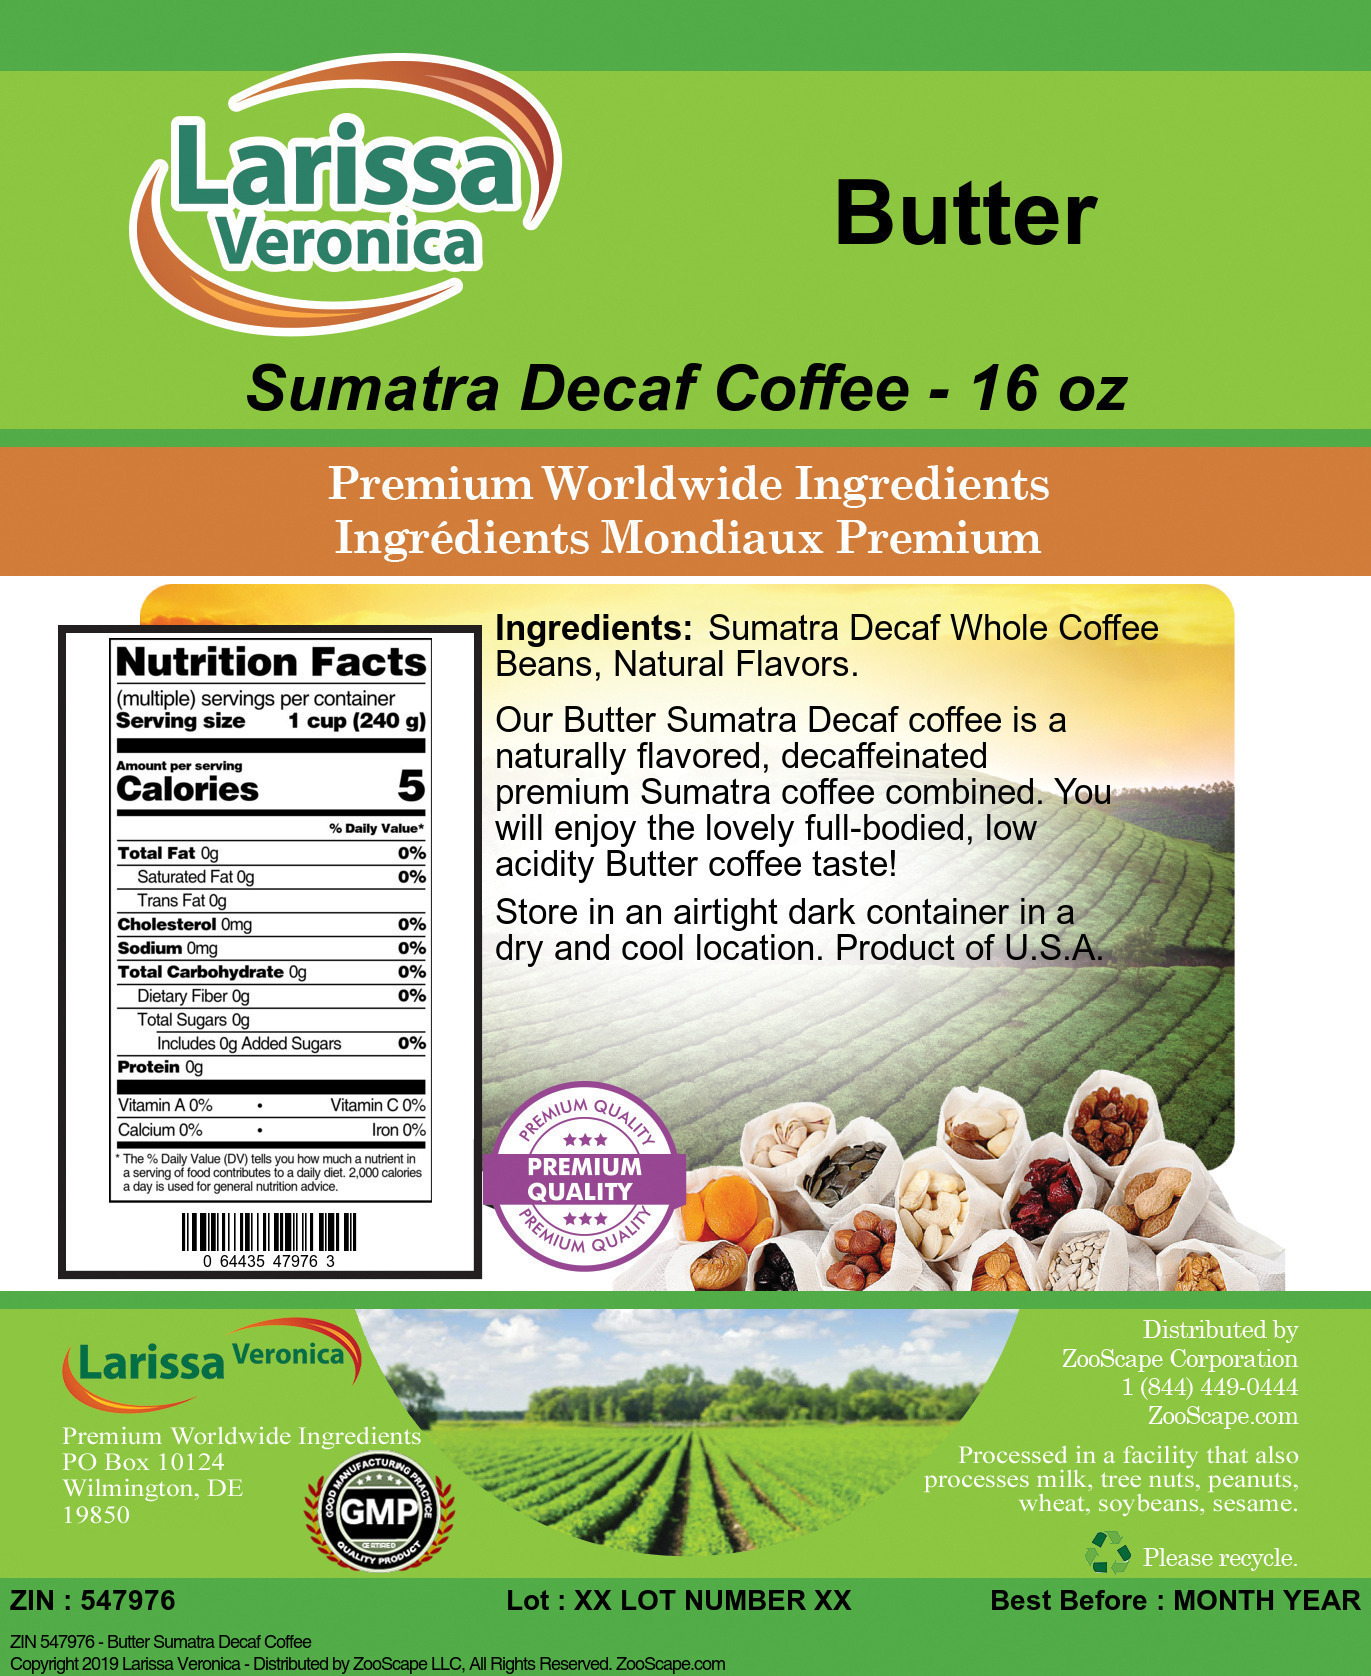 Butter Sumatra Decaf Coffee - Label